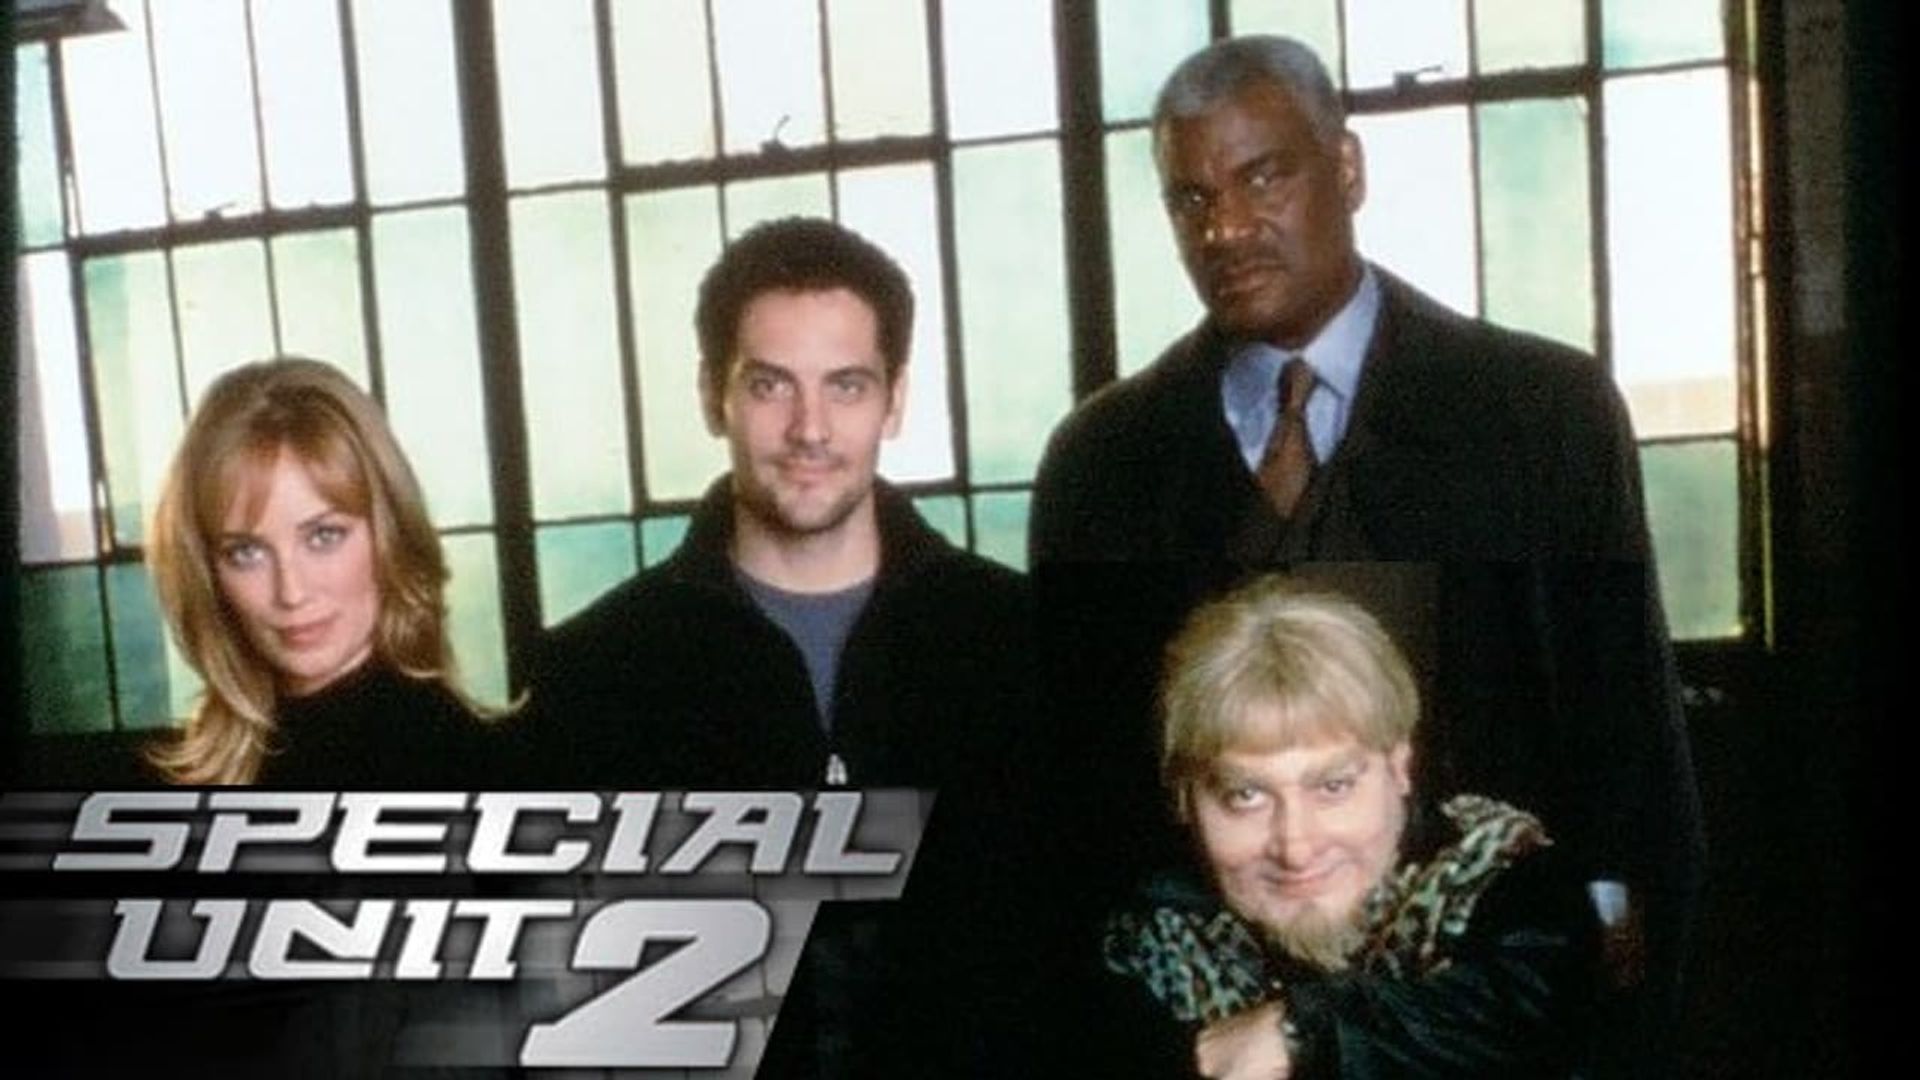 Special Unit 2 background